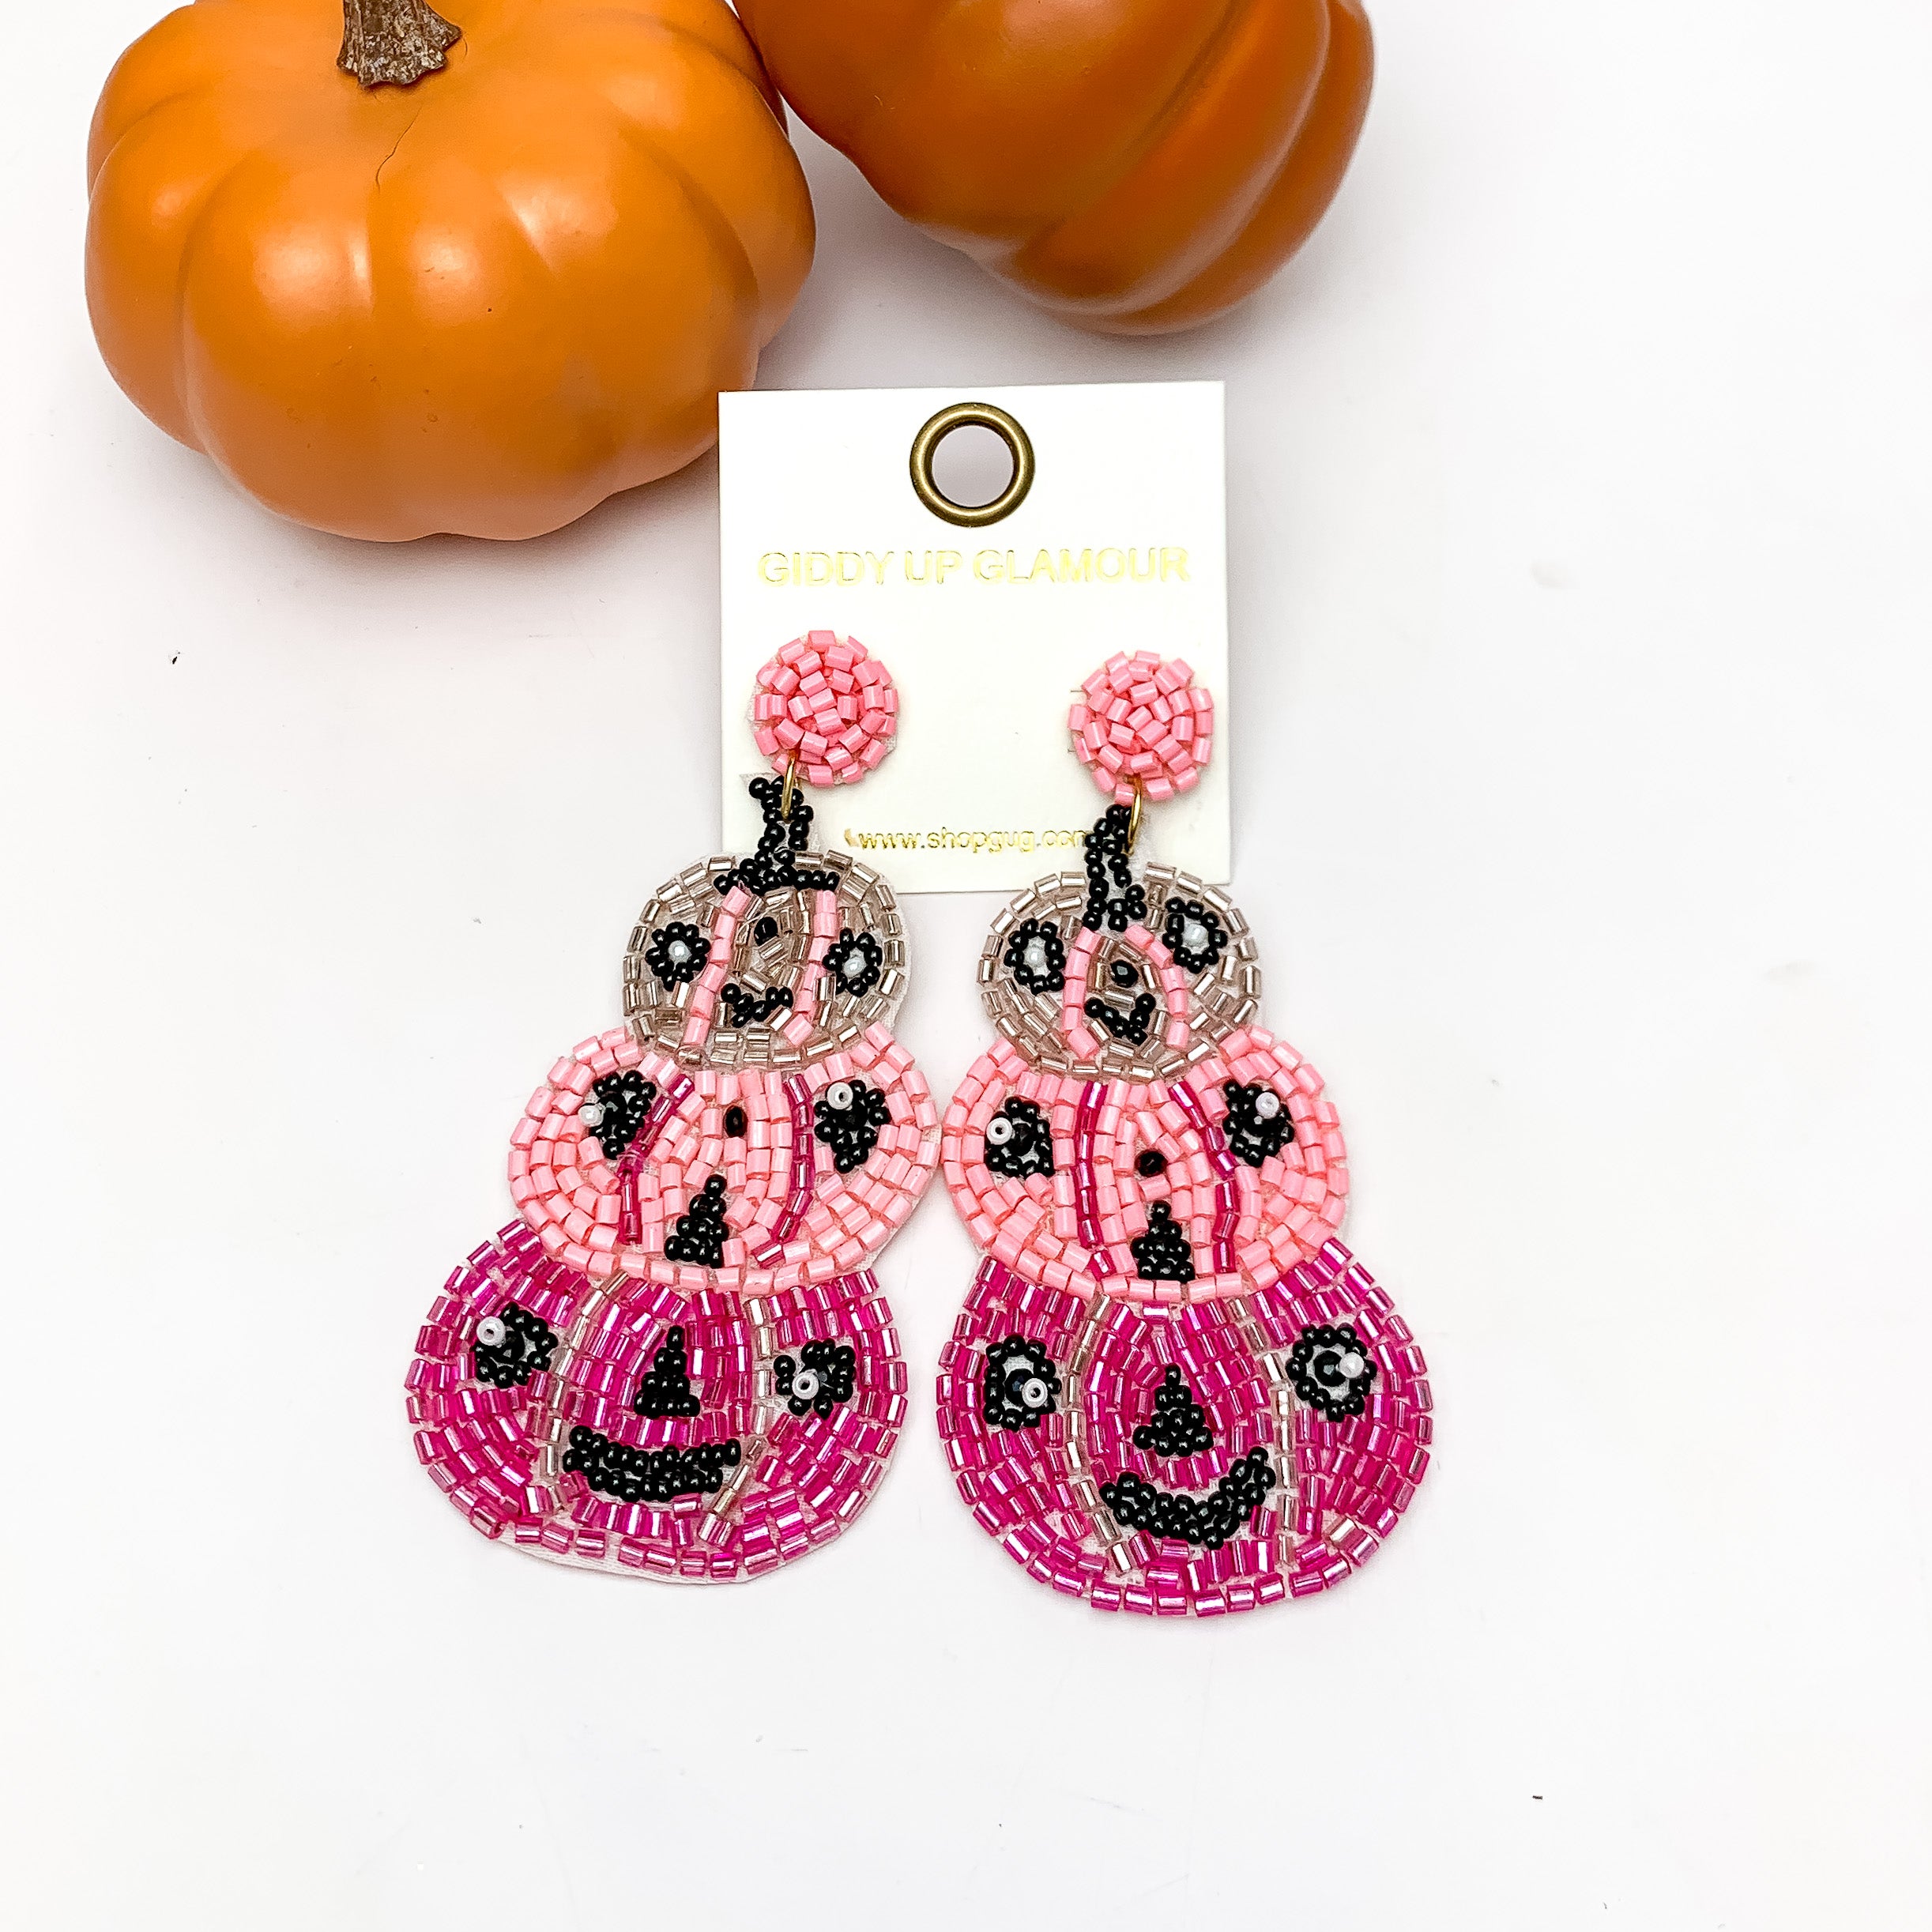 Three Tier Pumpkin Beaded Earrings in Pink. These earrings are pictured on a white background with pumpkins behind the earrings.